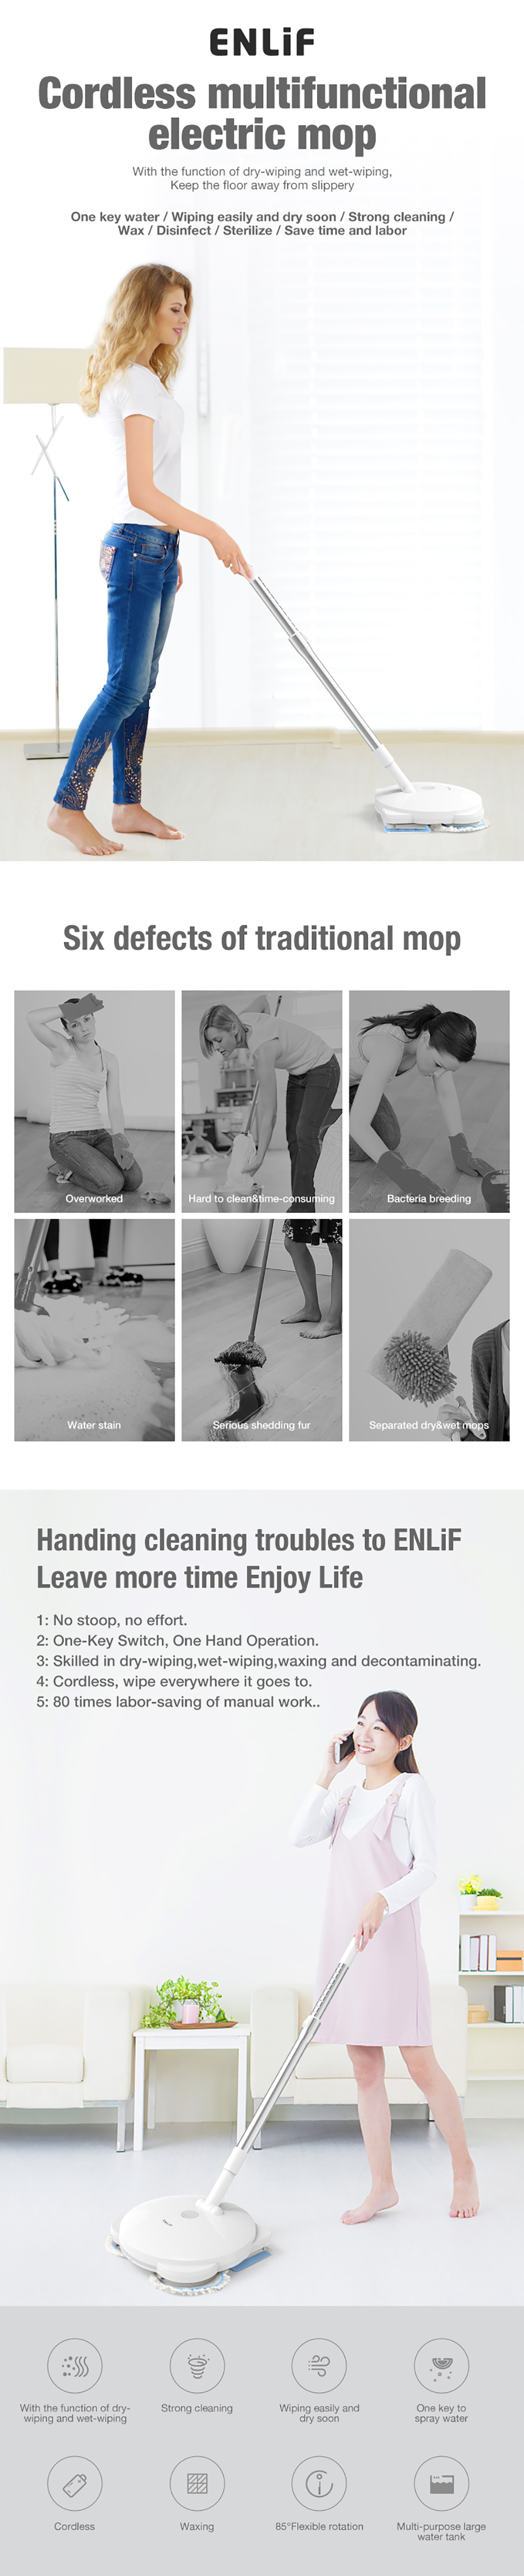 ENLiF-F1-Electric-Wireless-Spin-Pet-Mop-Vacuum-Cleaner-Cordless-Rechargeable-Lightweight-Cleaner-Ele-1429553